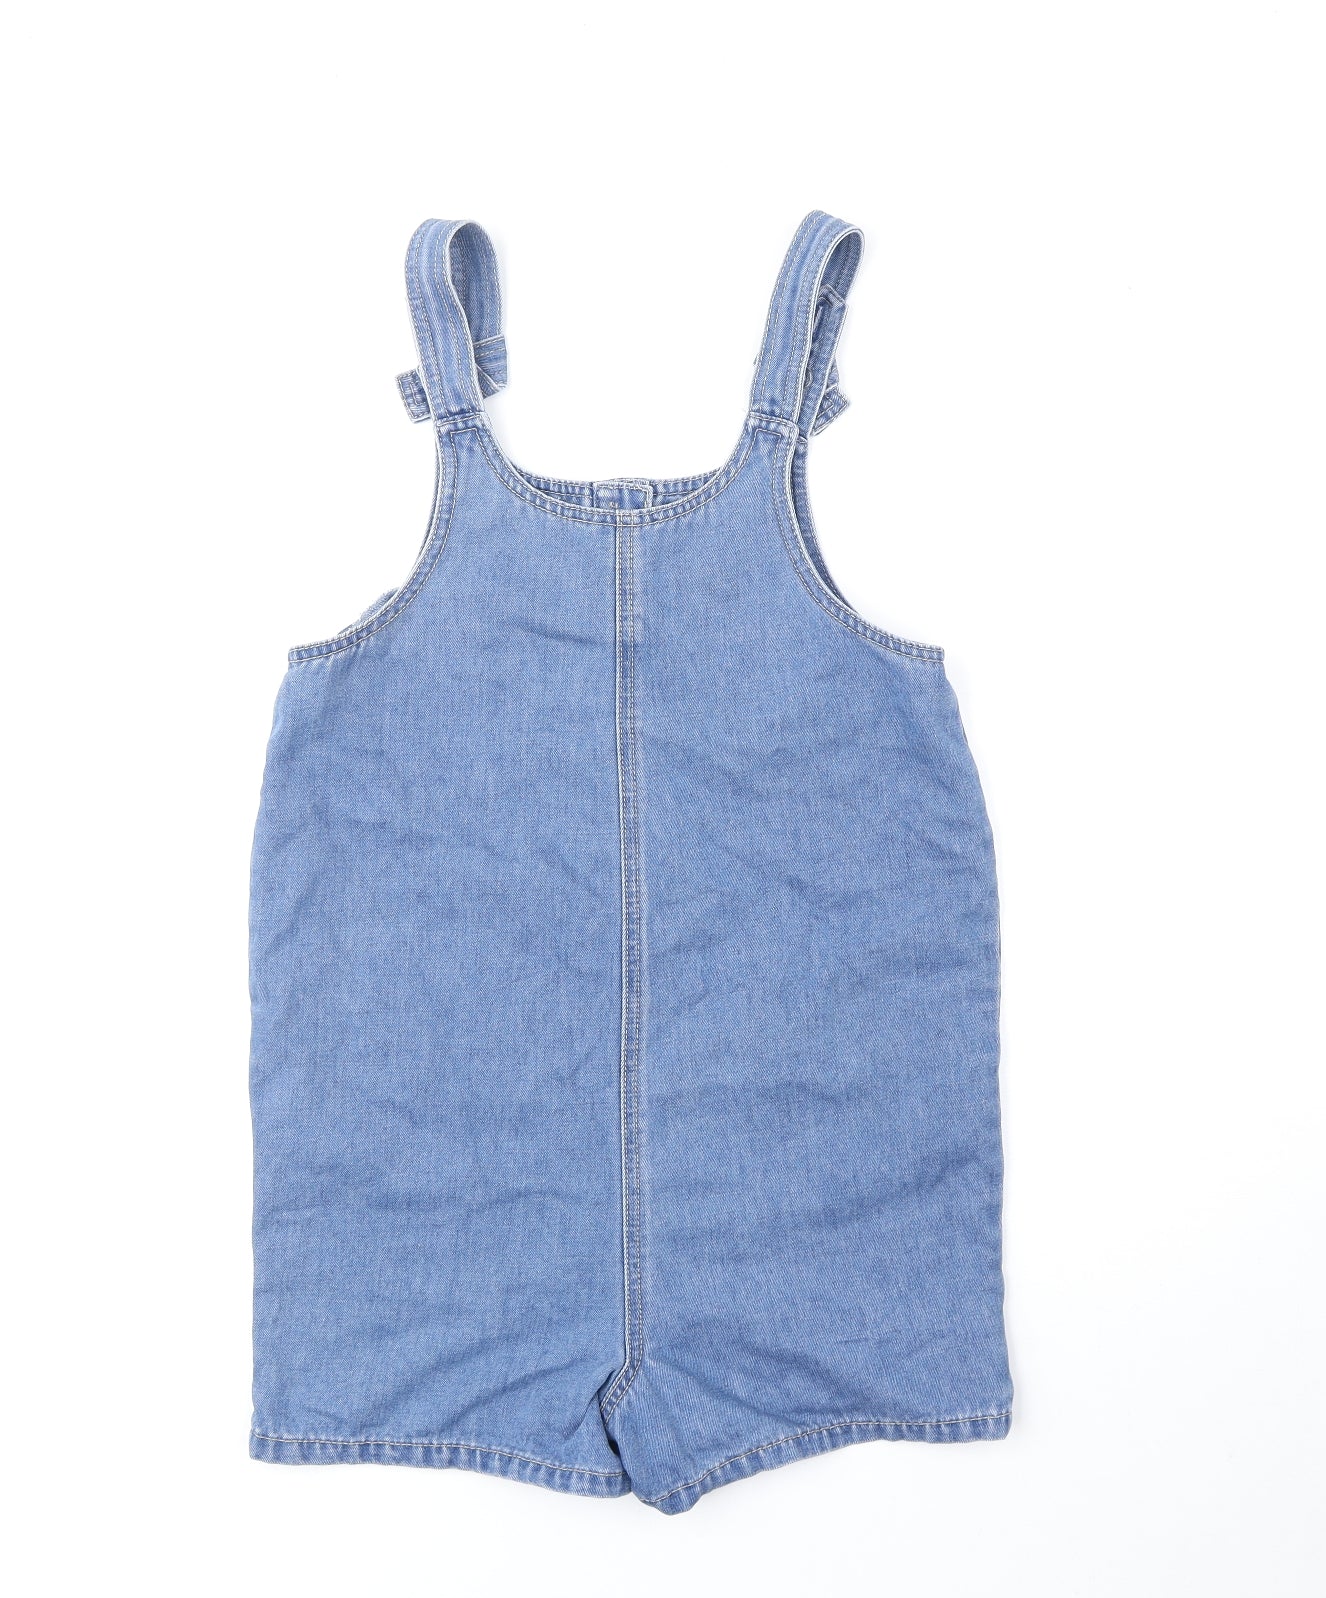 Nutmeg Girls Blue Cotton Dungaree One-Piece Size 12-13 Years Button